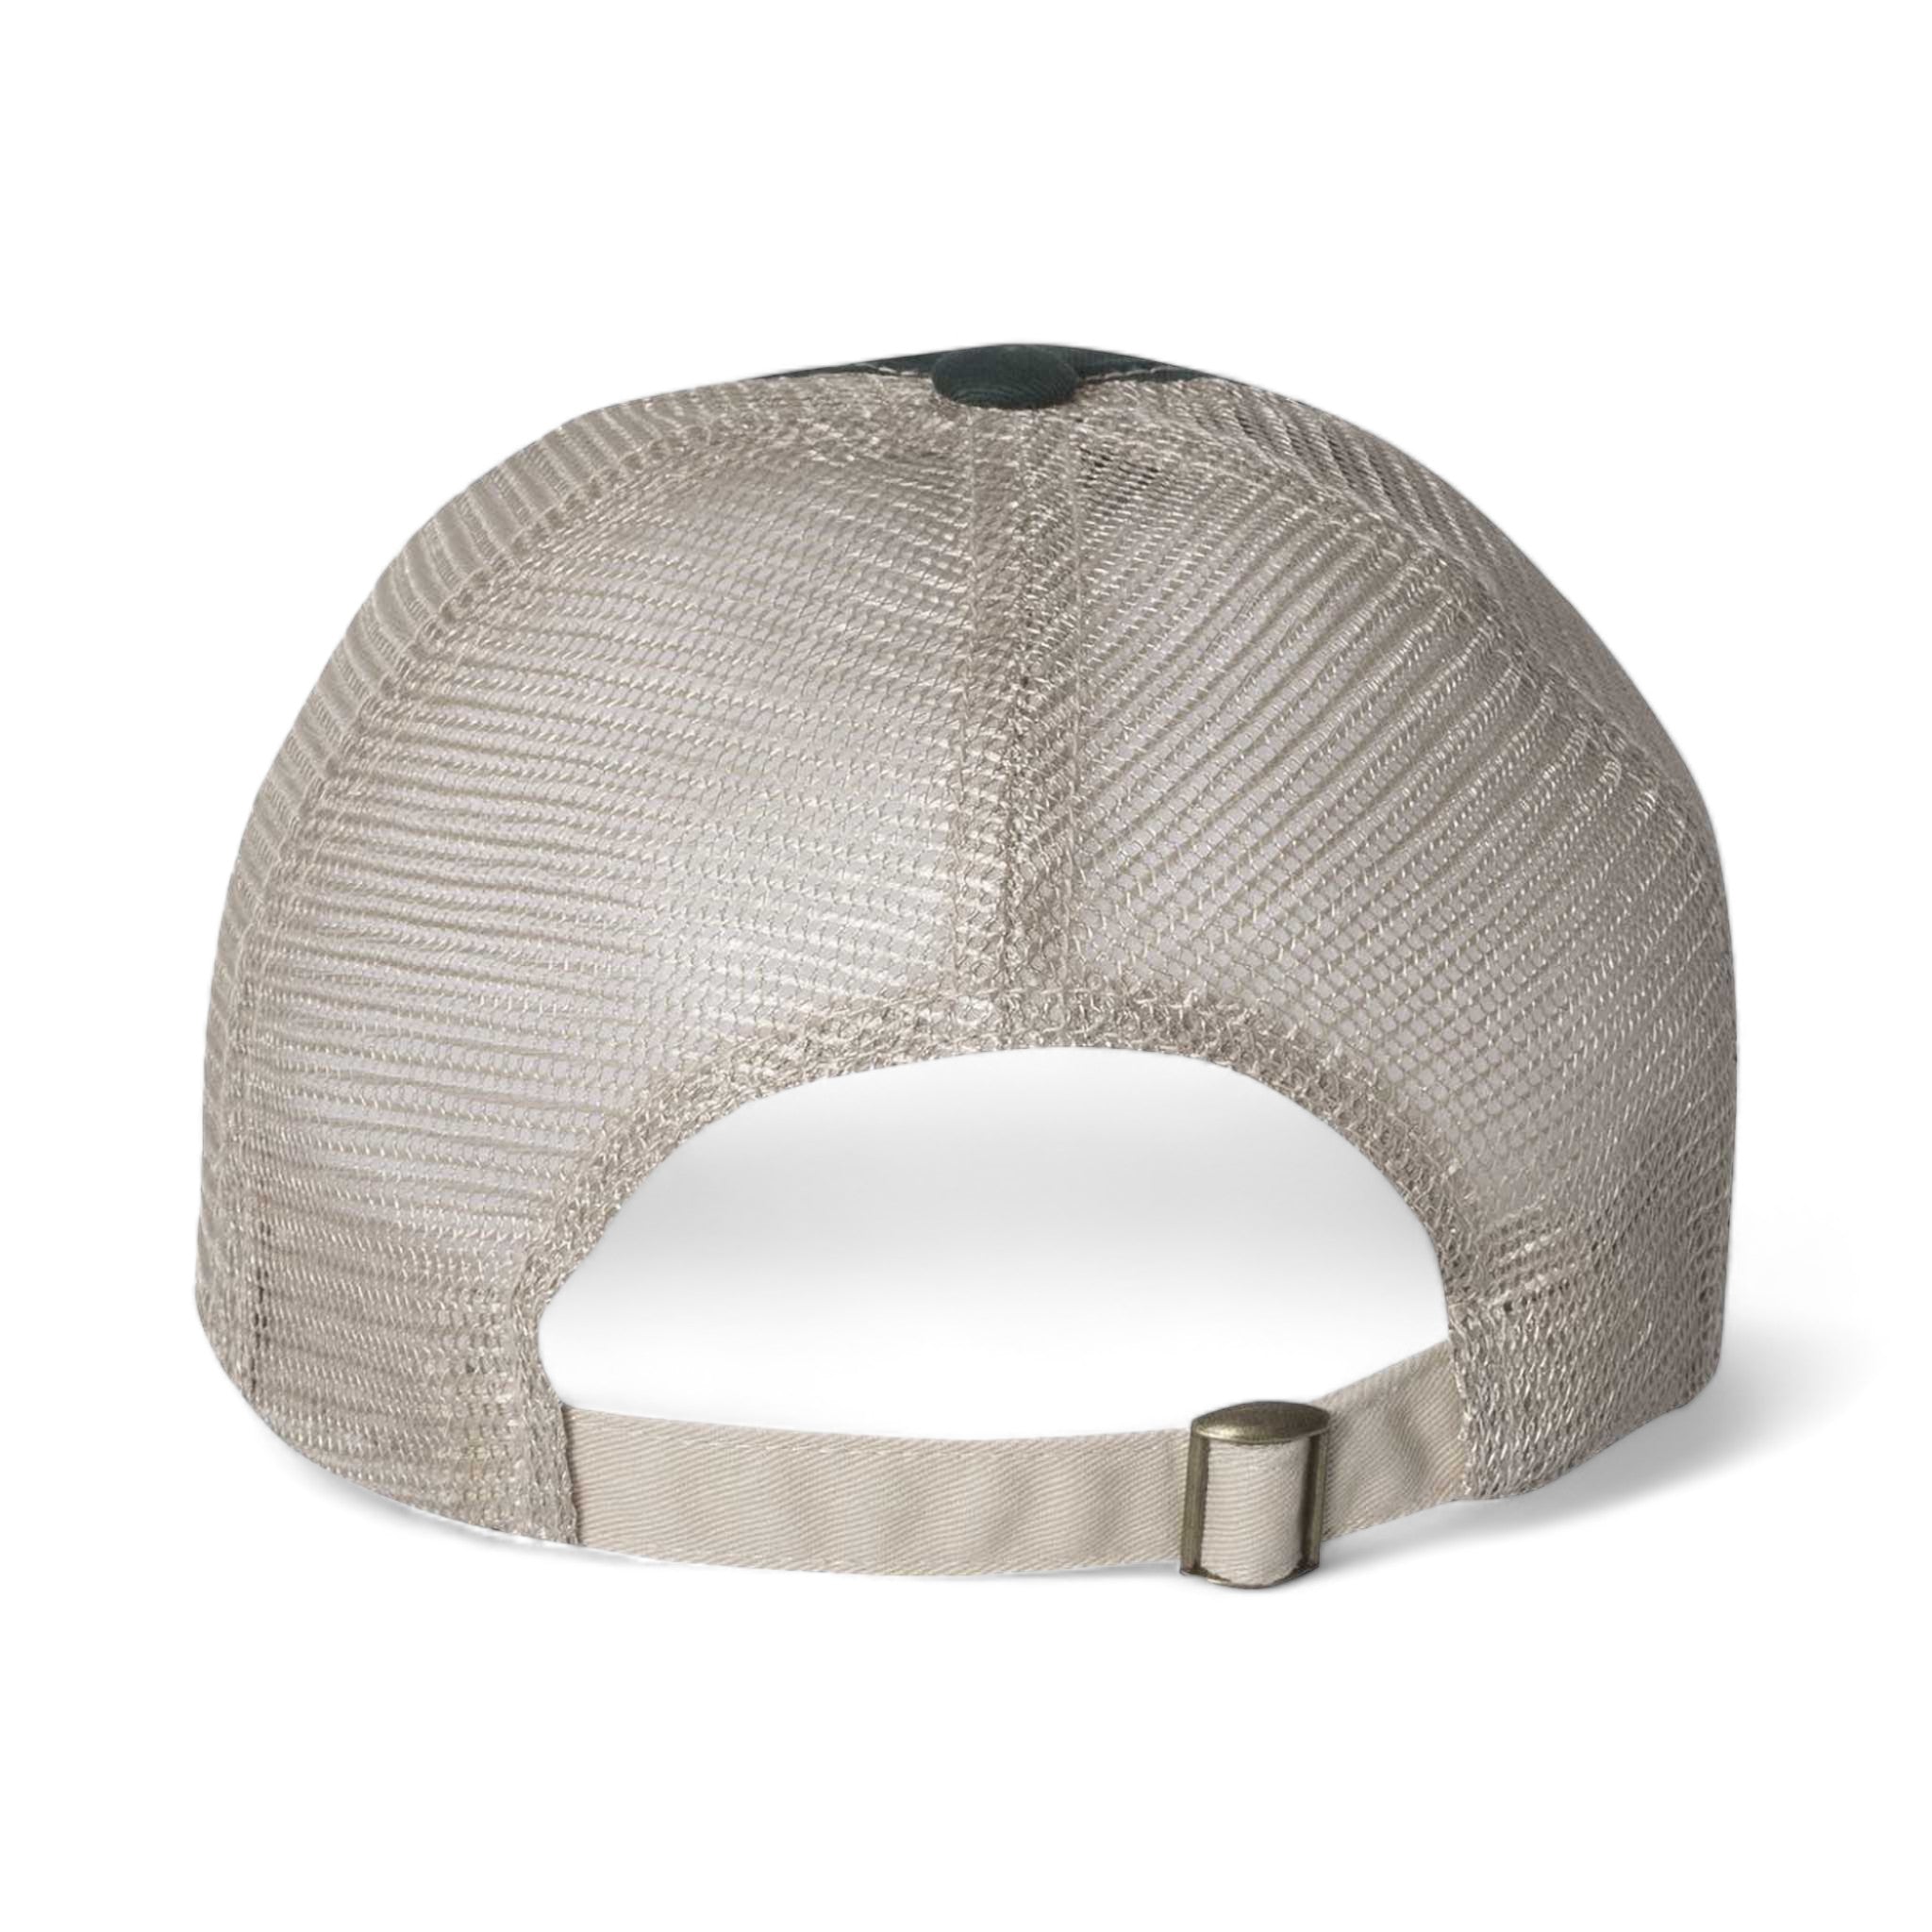 Back view of Sportsman 3100 custom hat in forest and khaki